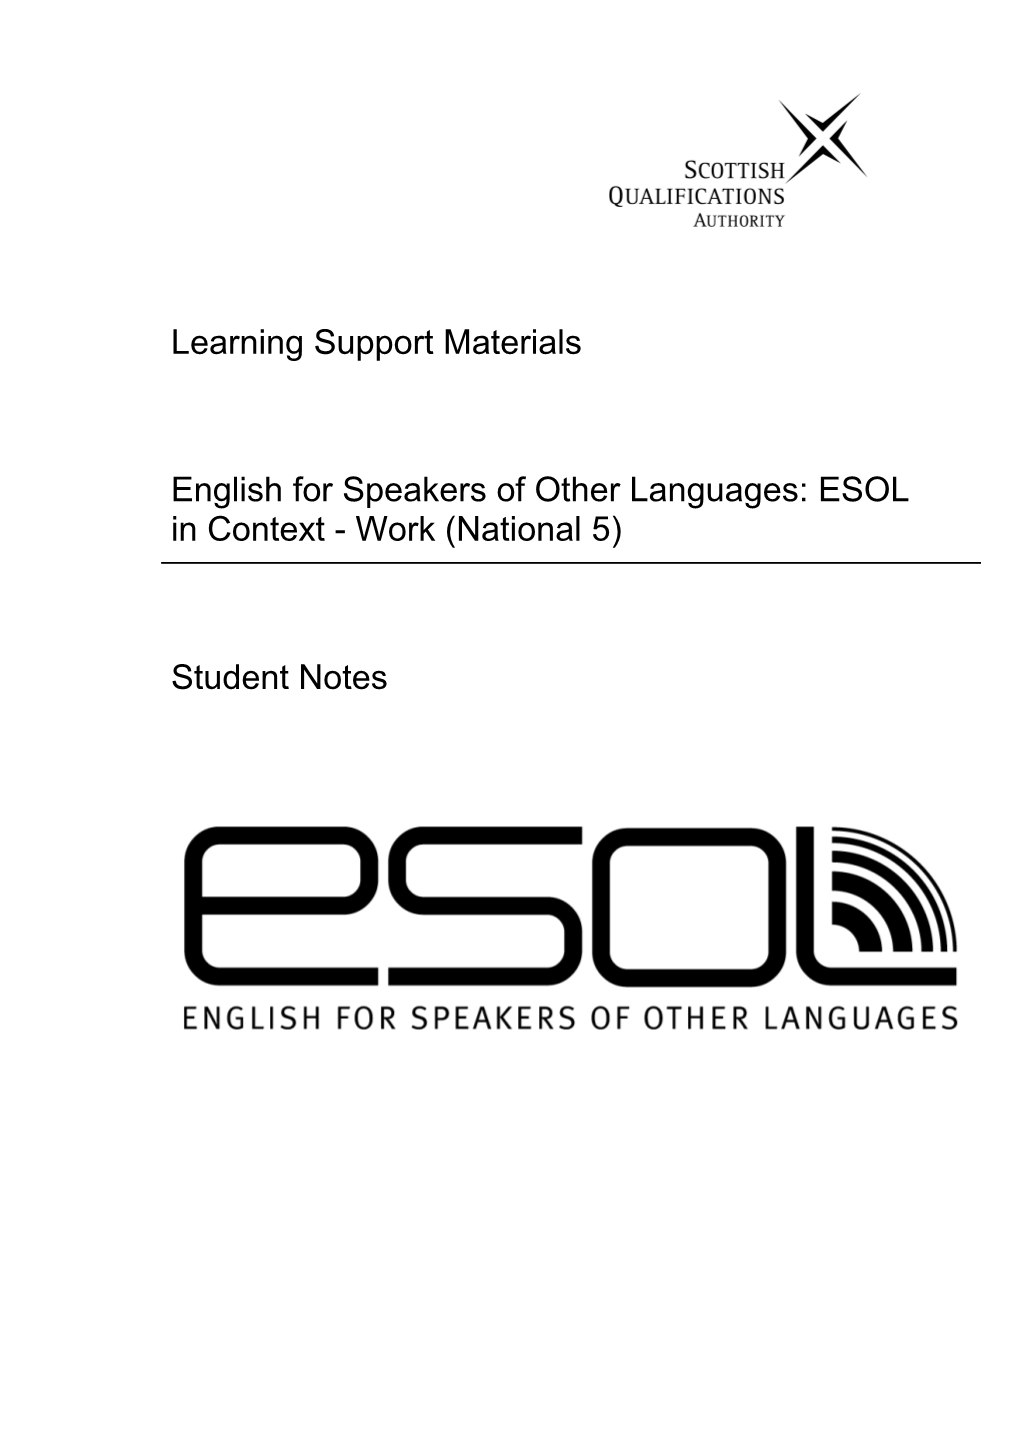 English for Speakers of Other Languages: ESOL in Context - Work (National 5)